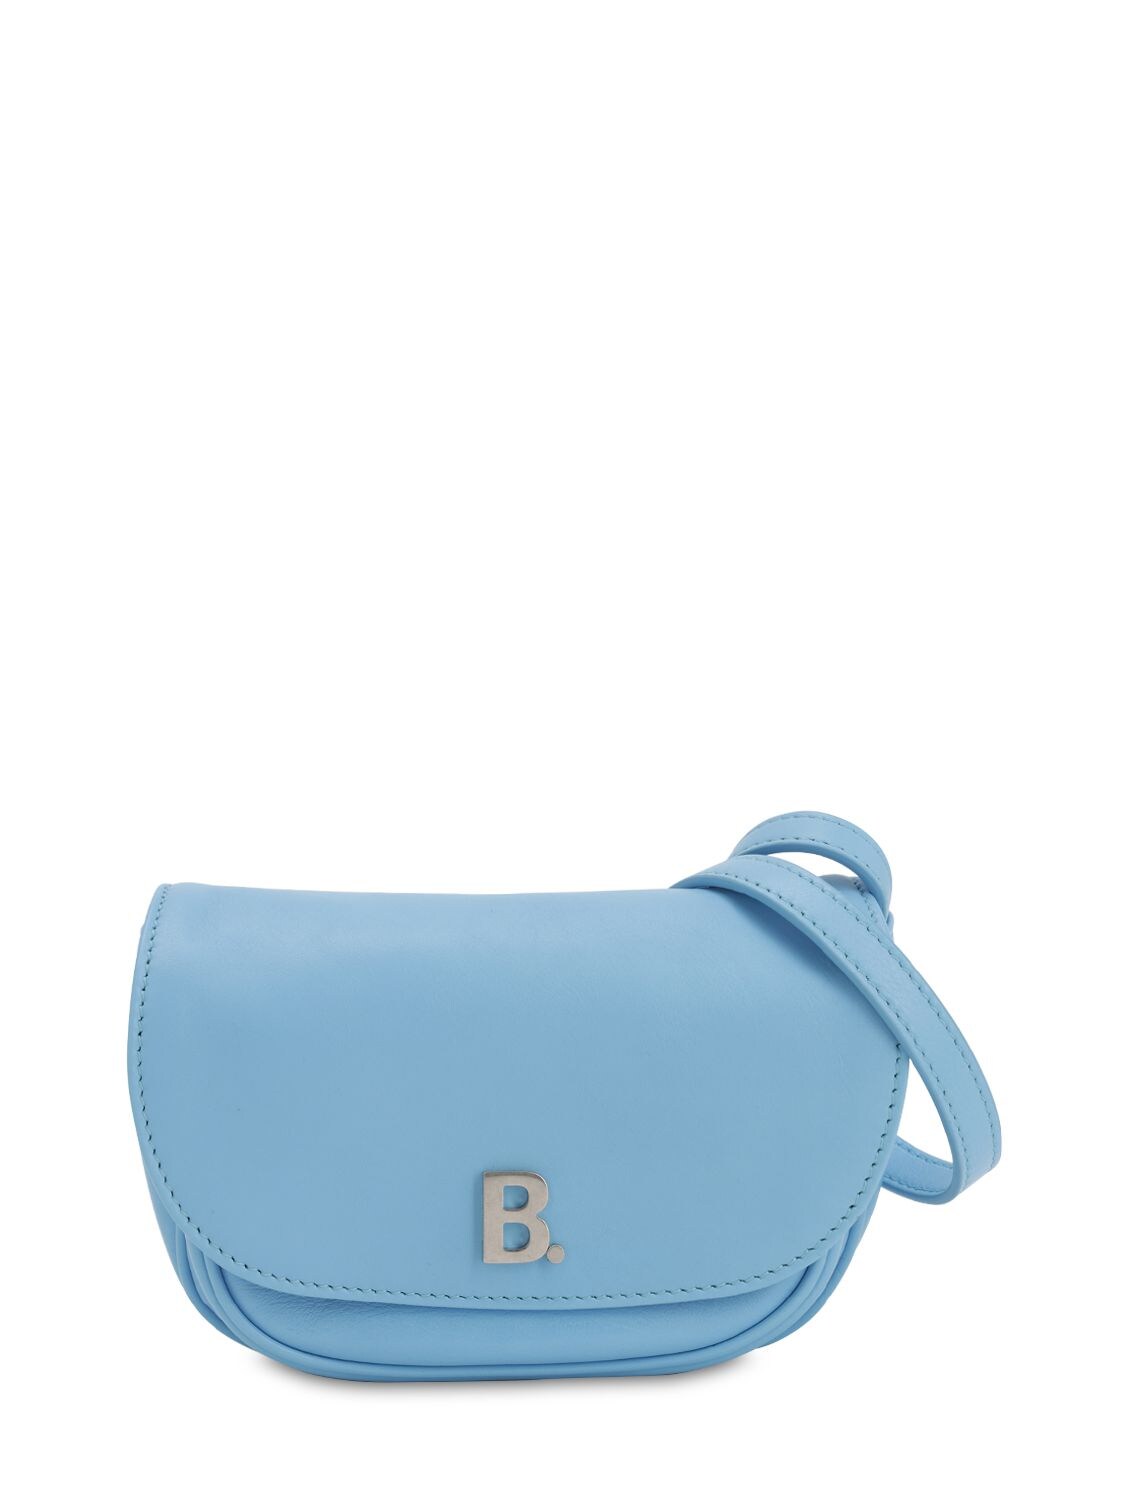 Balenciaga Xs Round Soft Leather Shoulder Bag In Light Blue